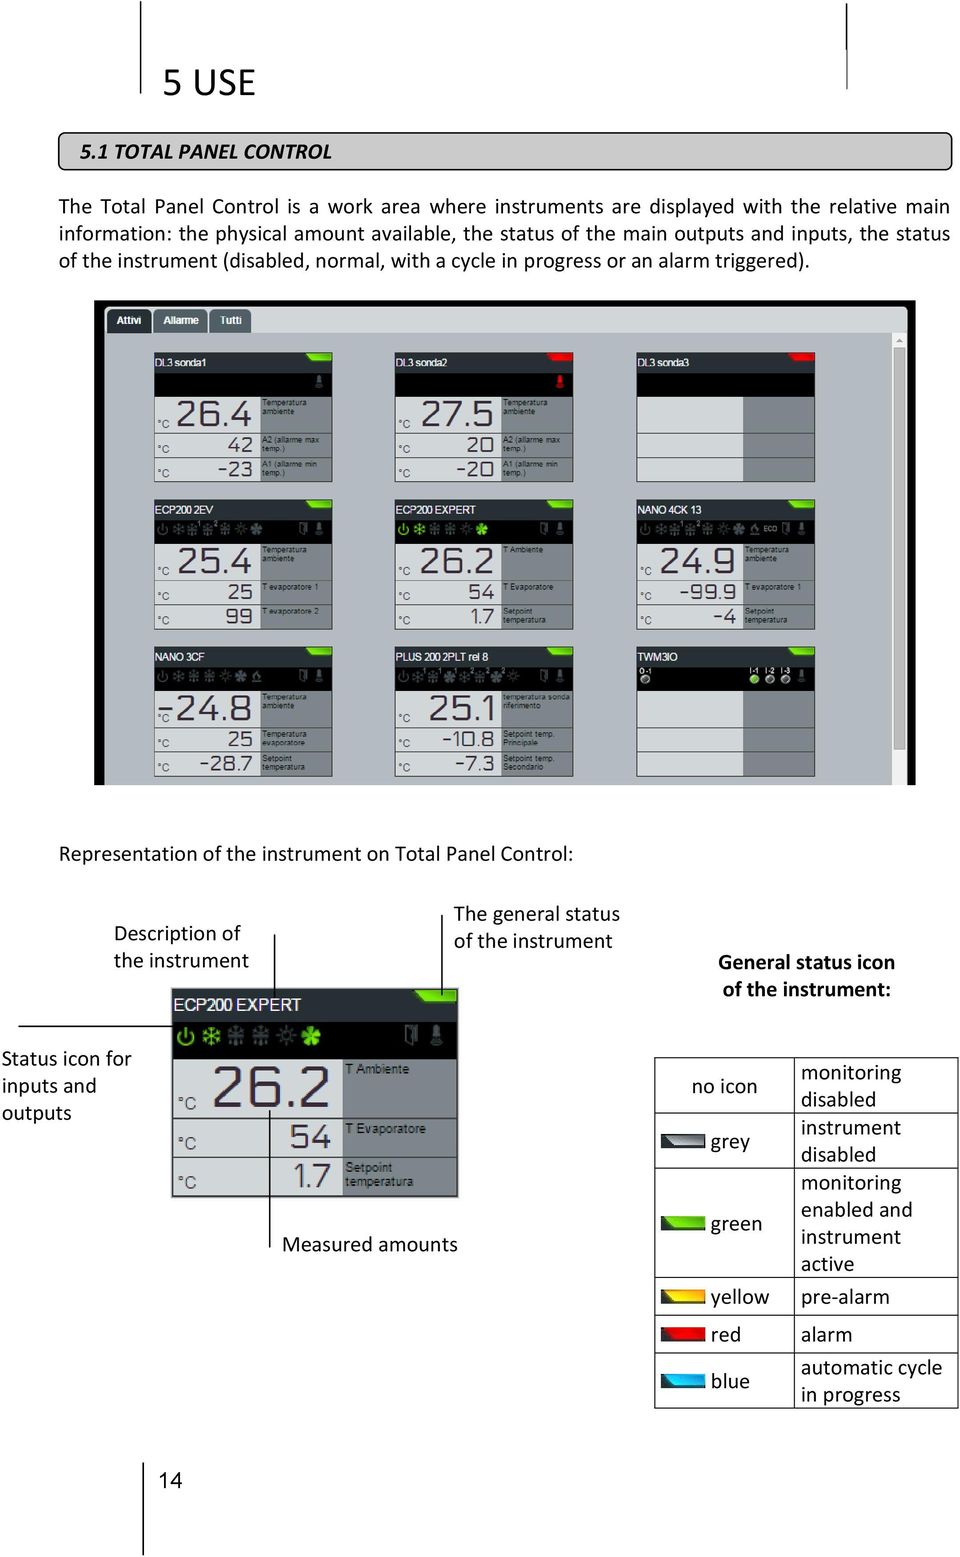 of the main outputs and inputs, the status of the instrument (disabled, normal, with a cycle in progress or an alarm triggered).